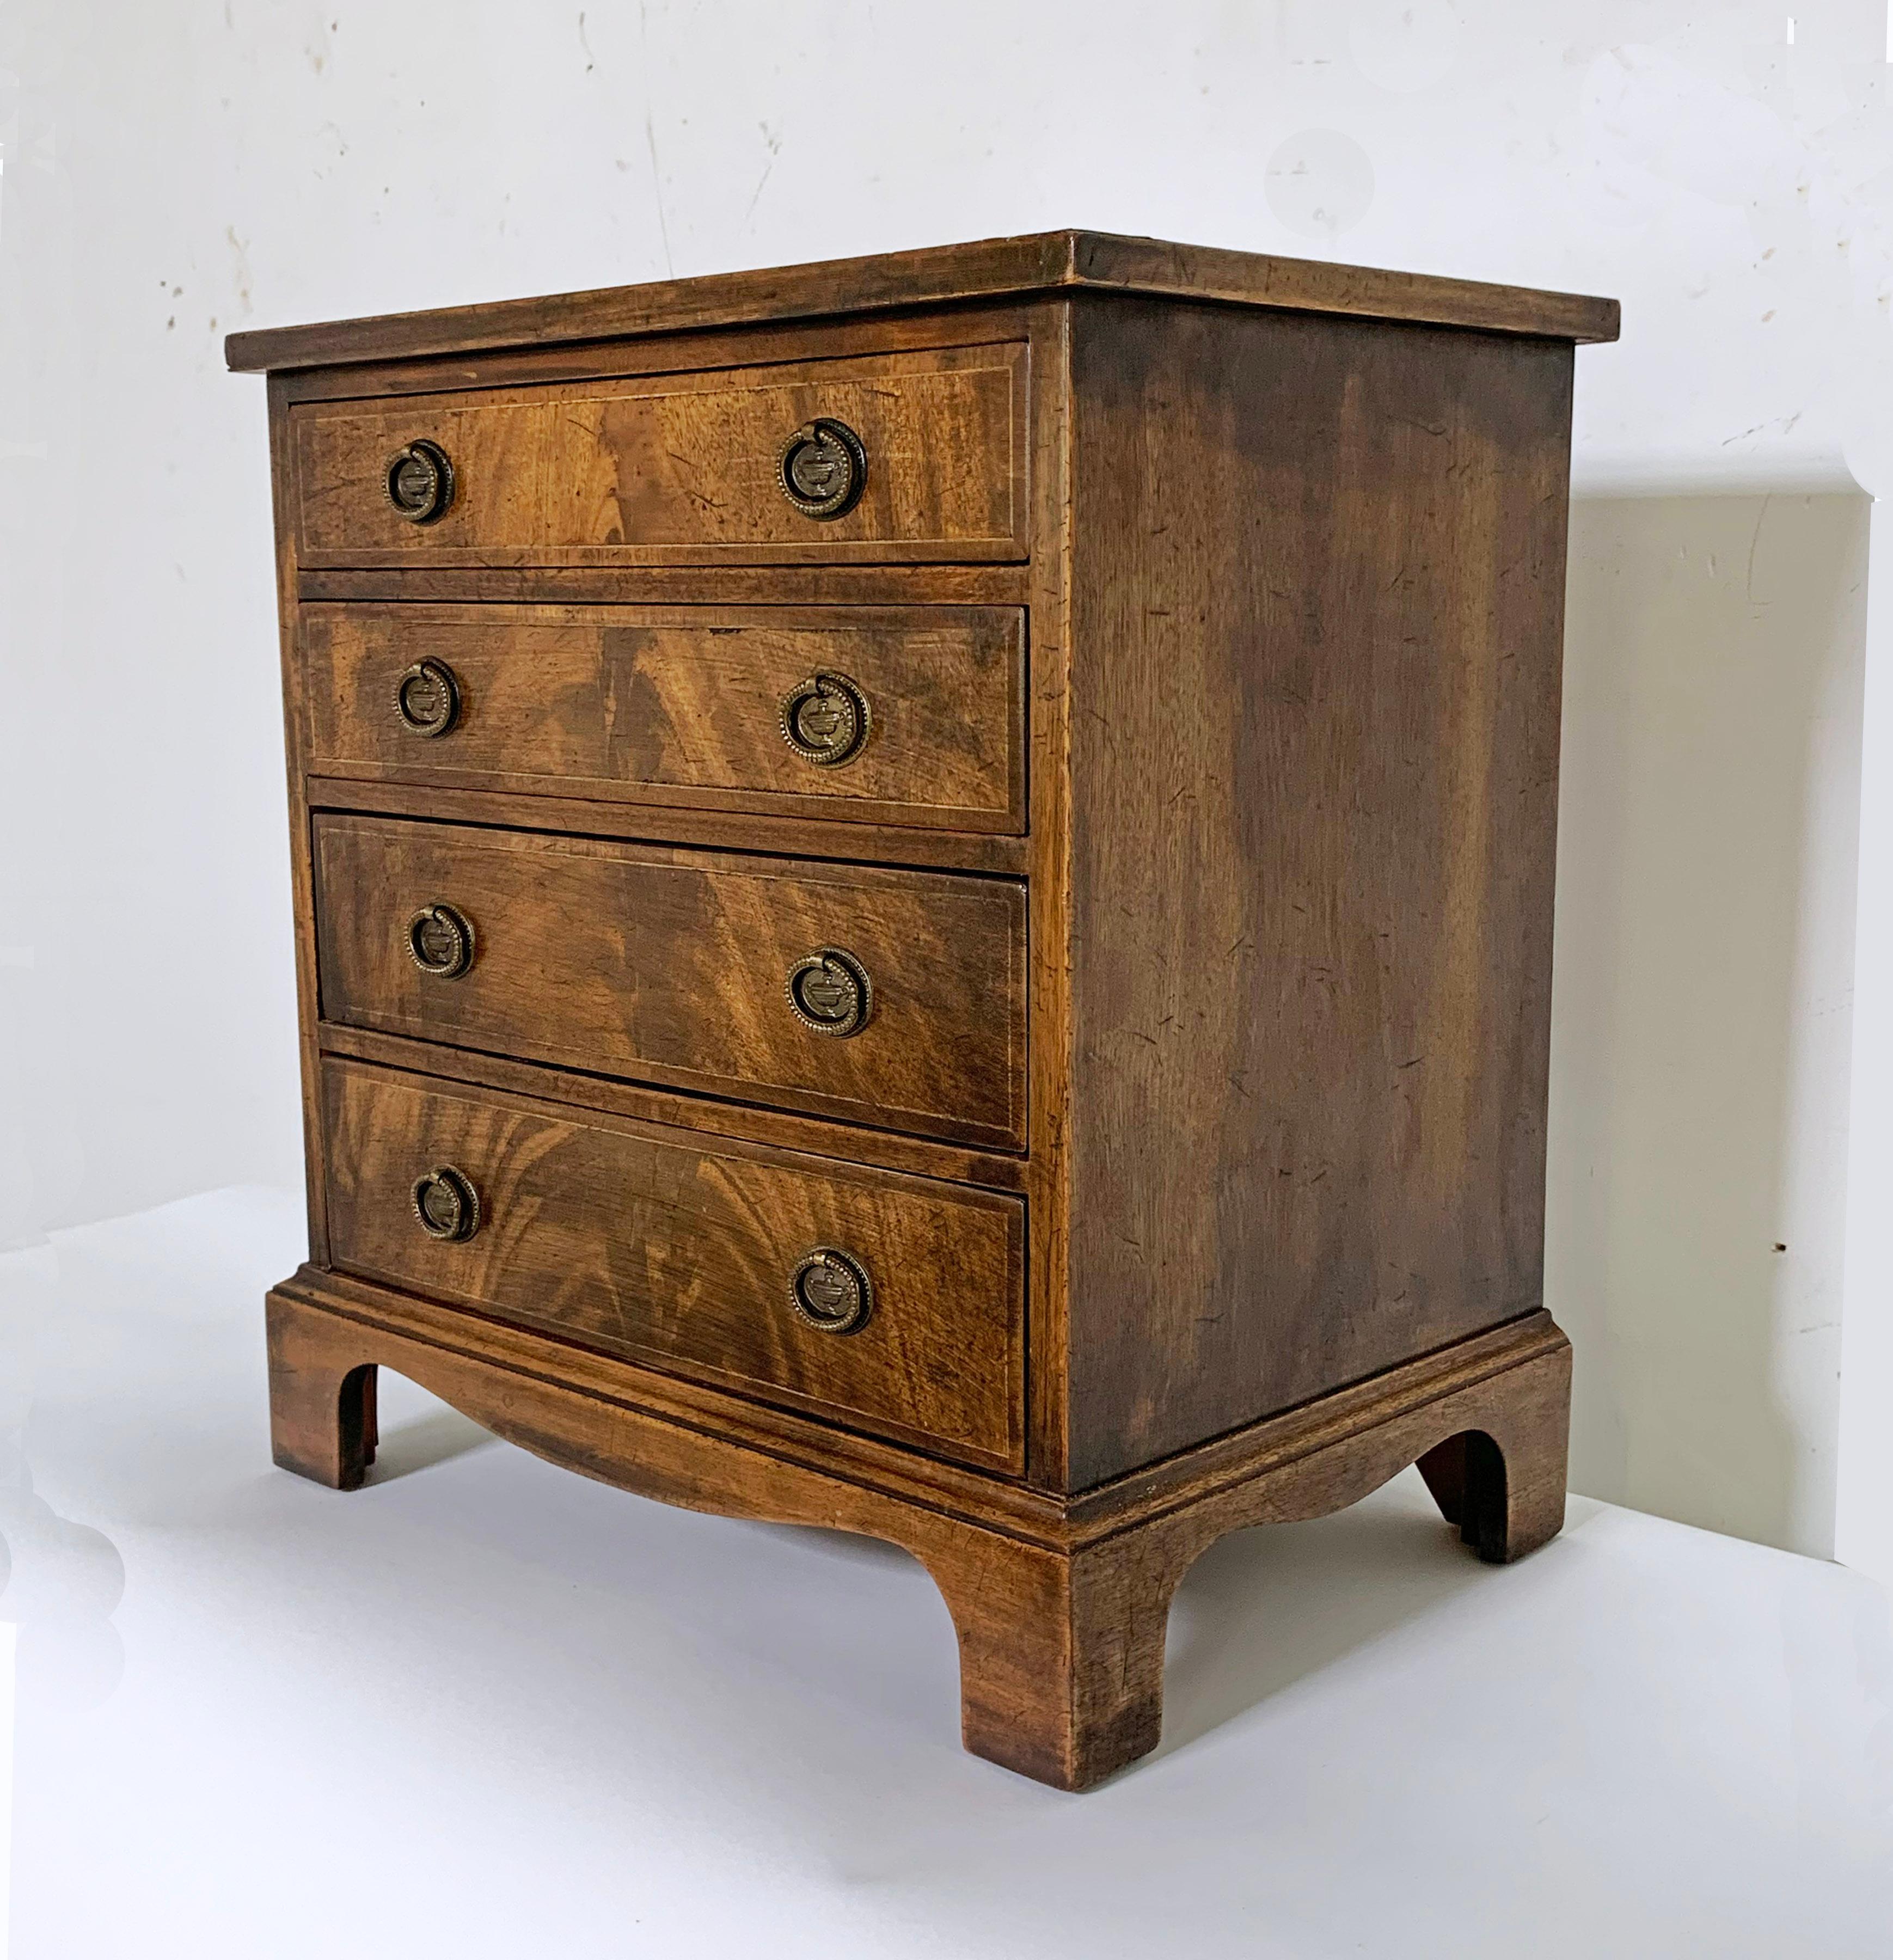 An antique miniature mahogany and elm Georgian child's chest of drawers with boxwood stringing, circa 1780s.